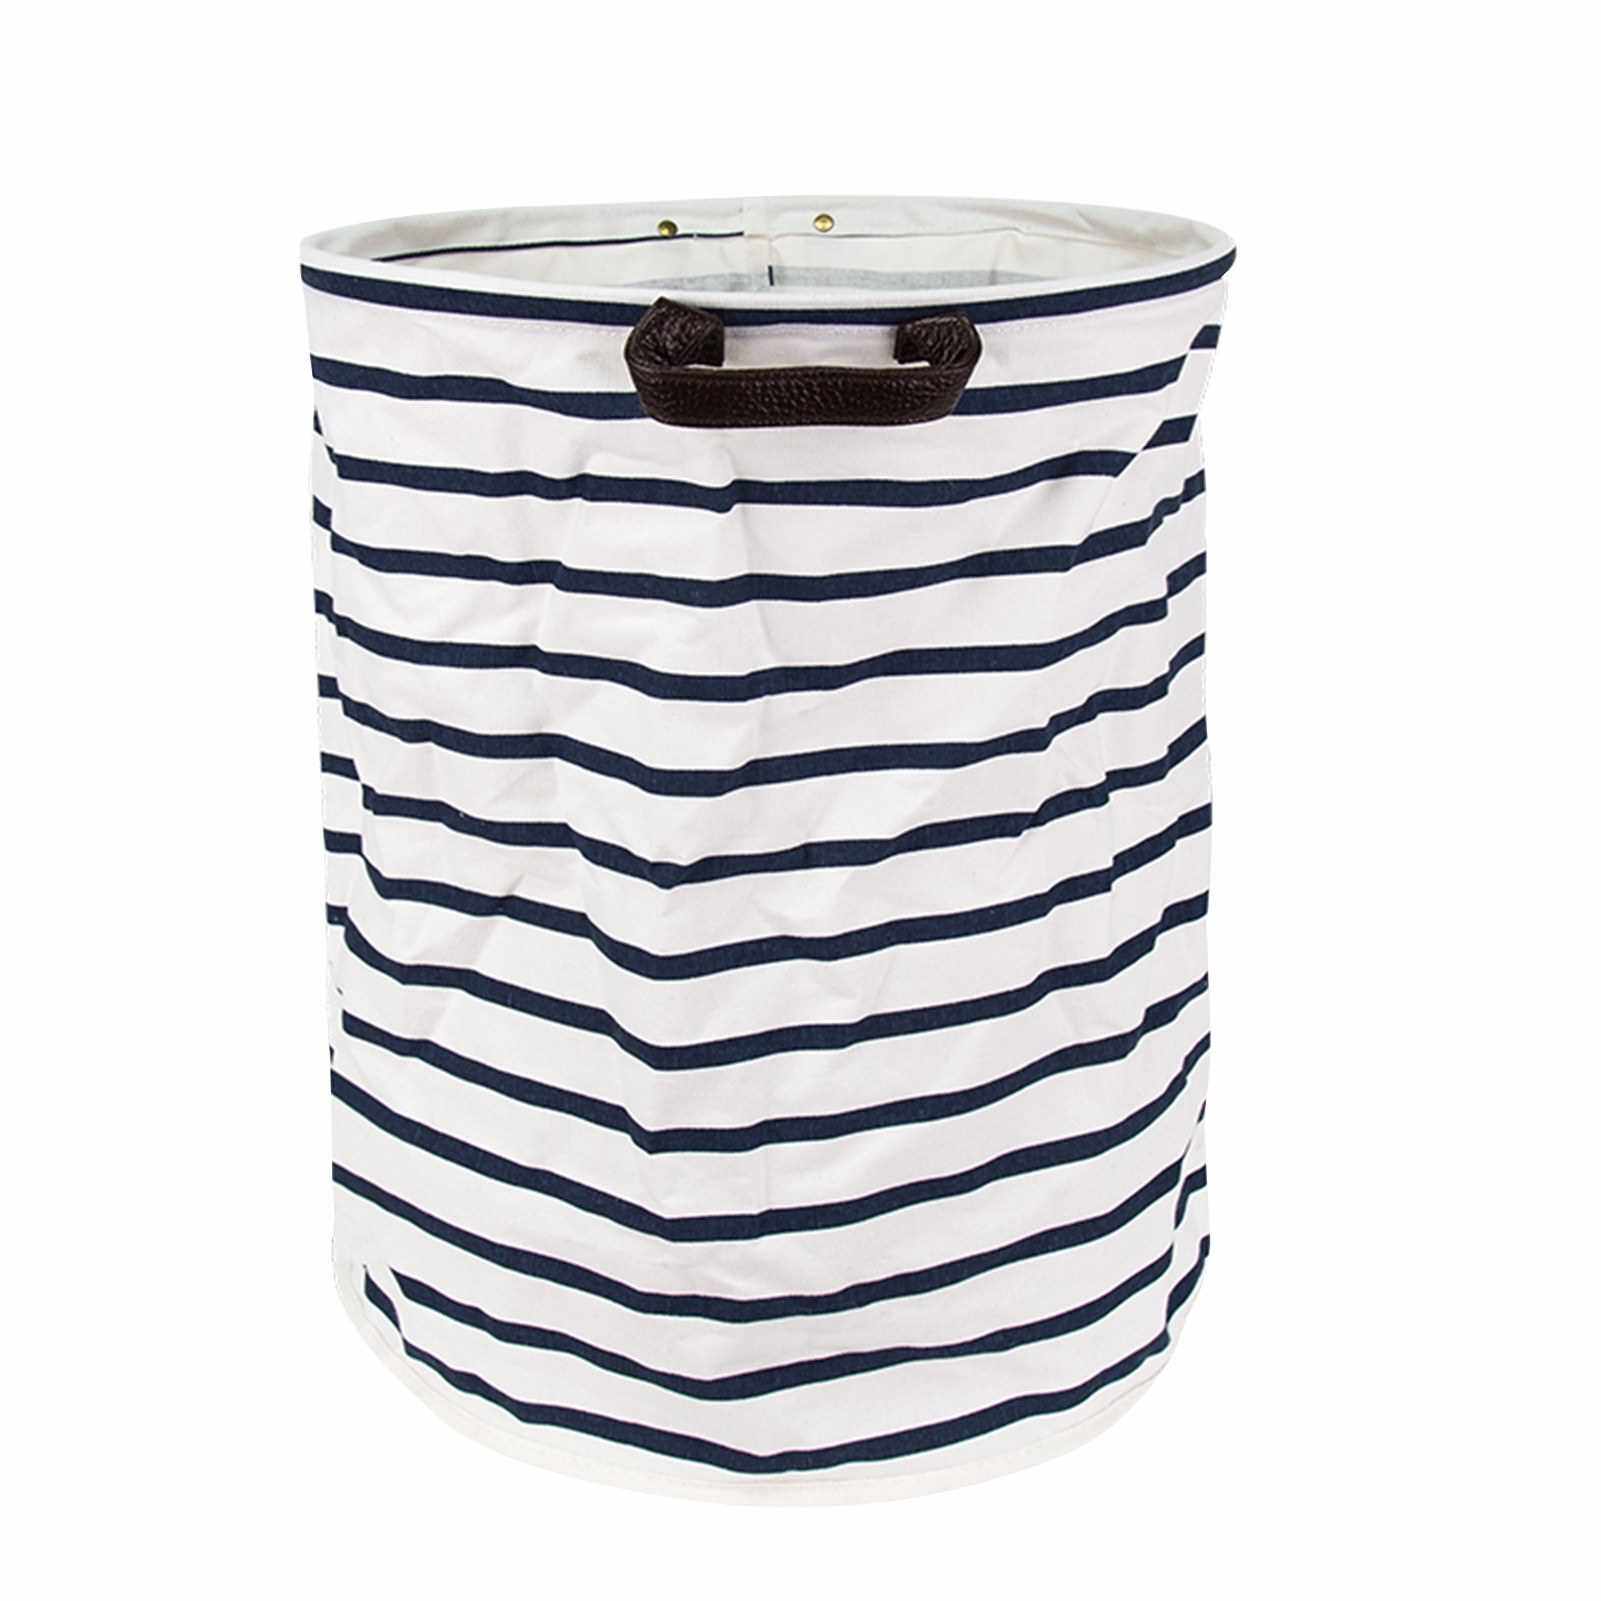 Laundry Storage Basket Freestanding Laundry Hamper Collapsible Large Clothes Basket with Handles for Storing Clothing Diapers Toys 15 x 19 Inches (Standard)